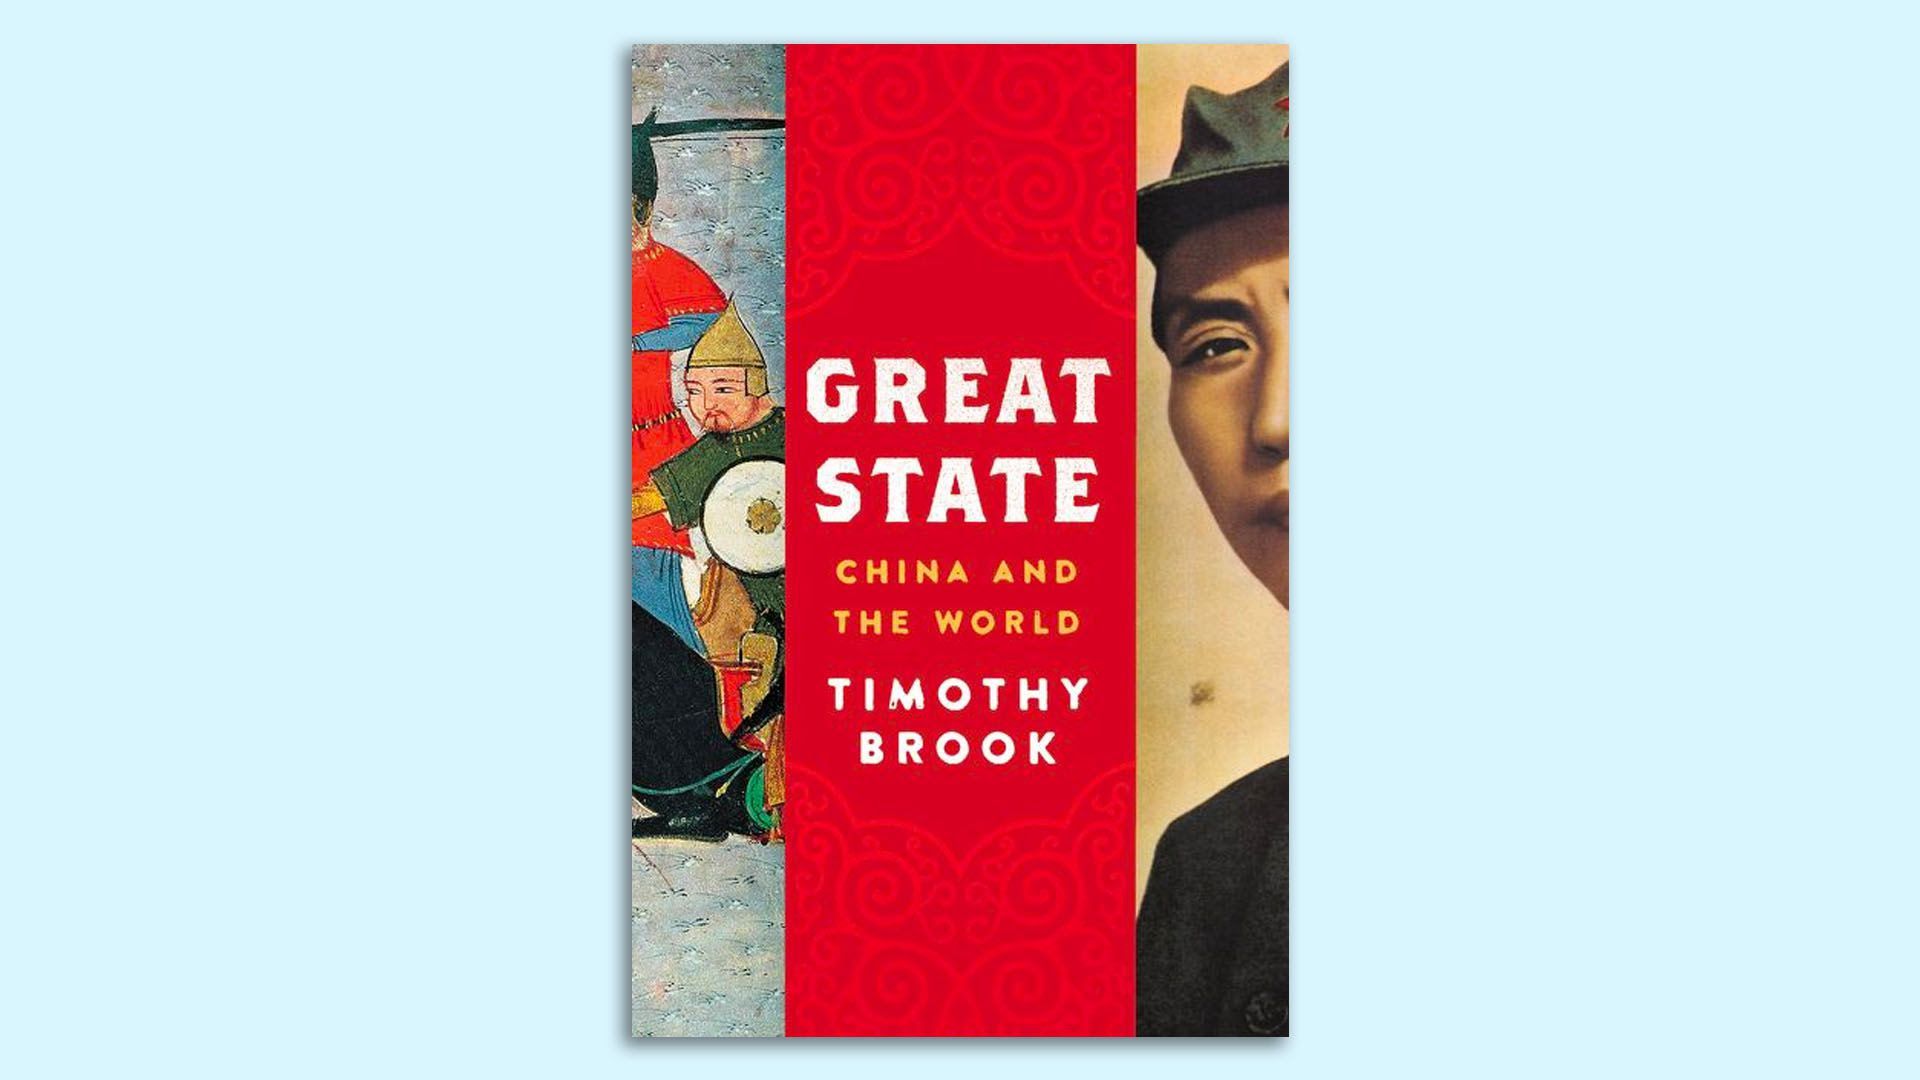 The cover of "Great State: China and the world"